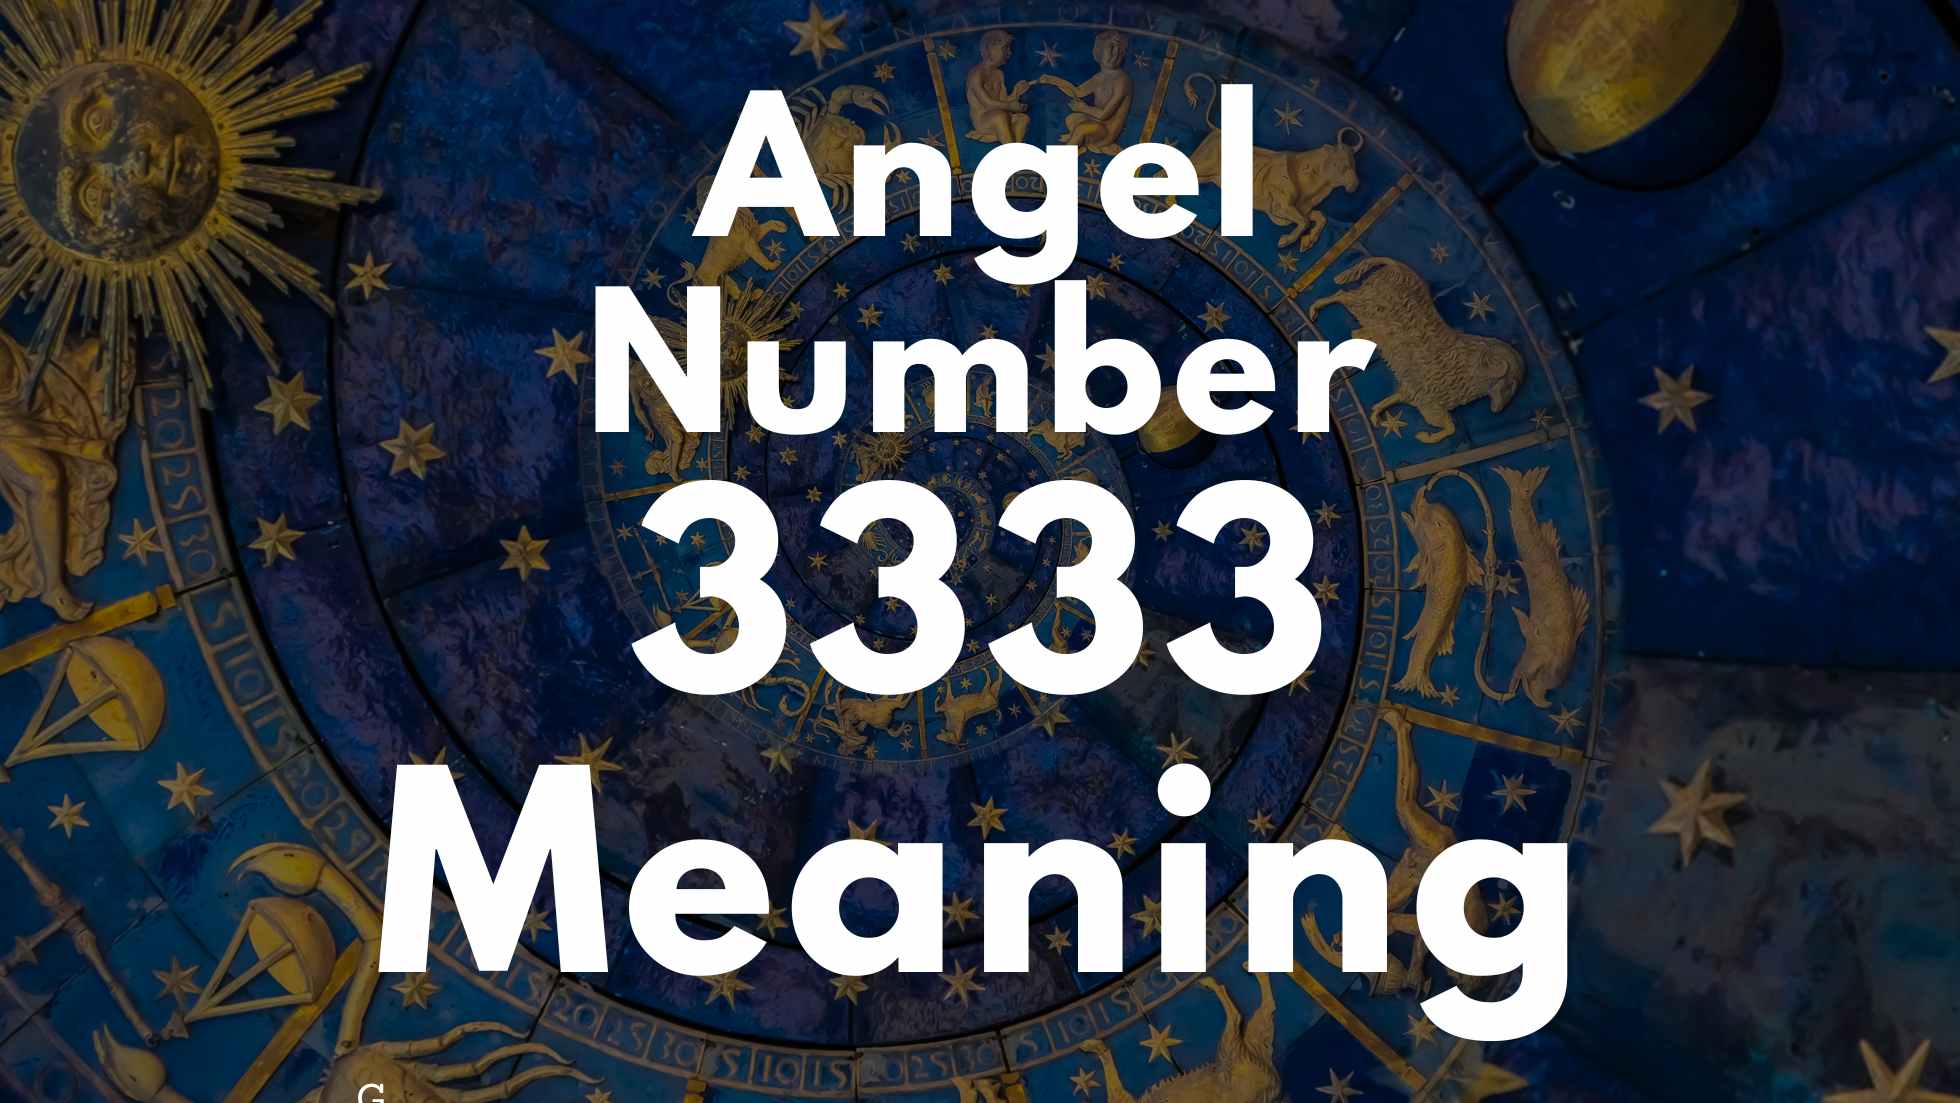 Angel Number 3333 Spiritual Meaning, Symbolism, and Significance